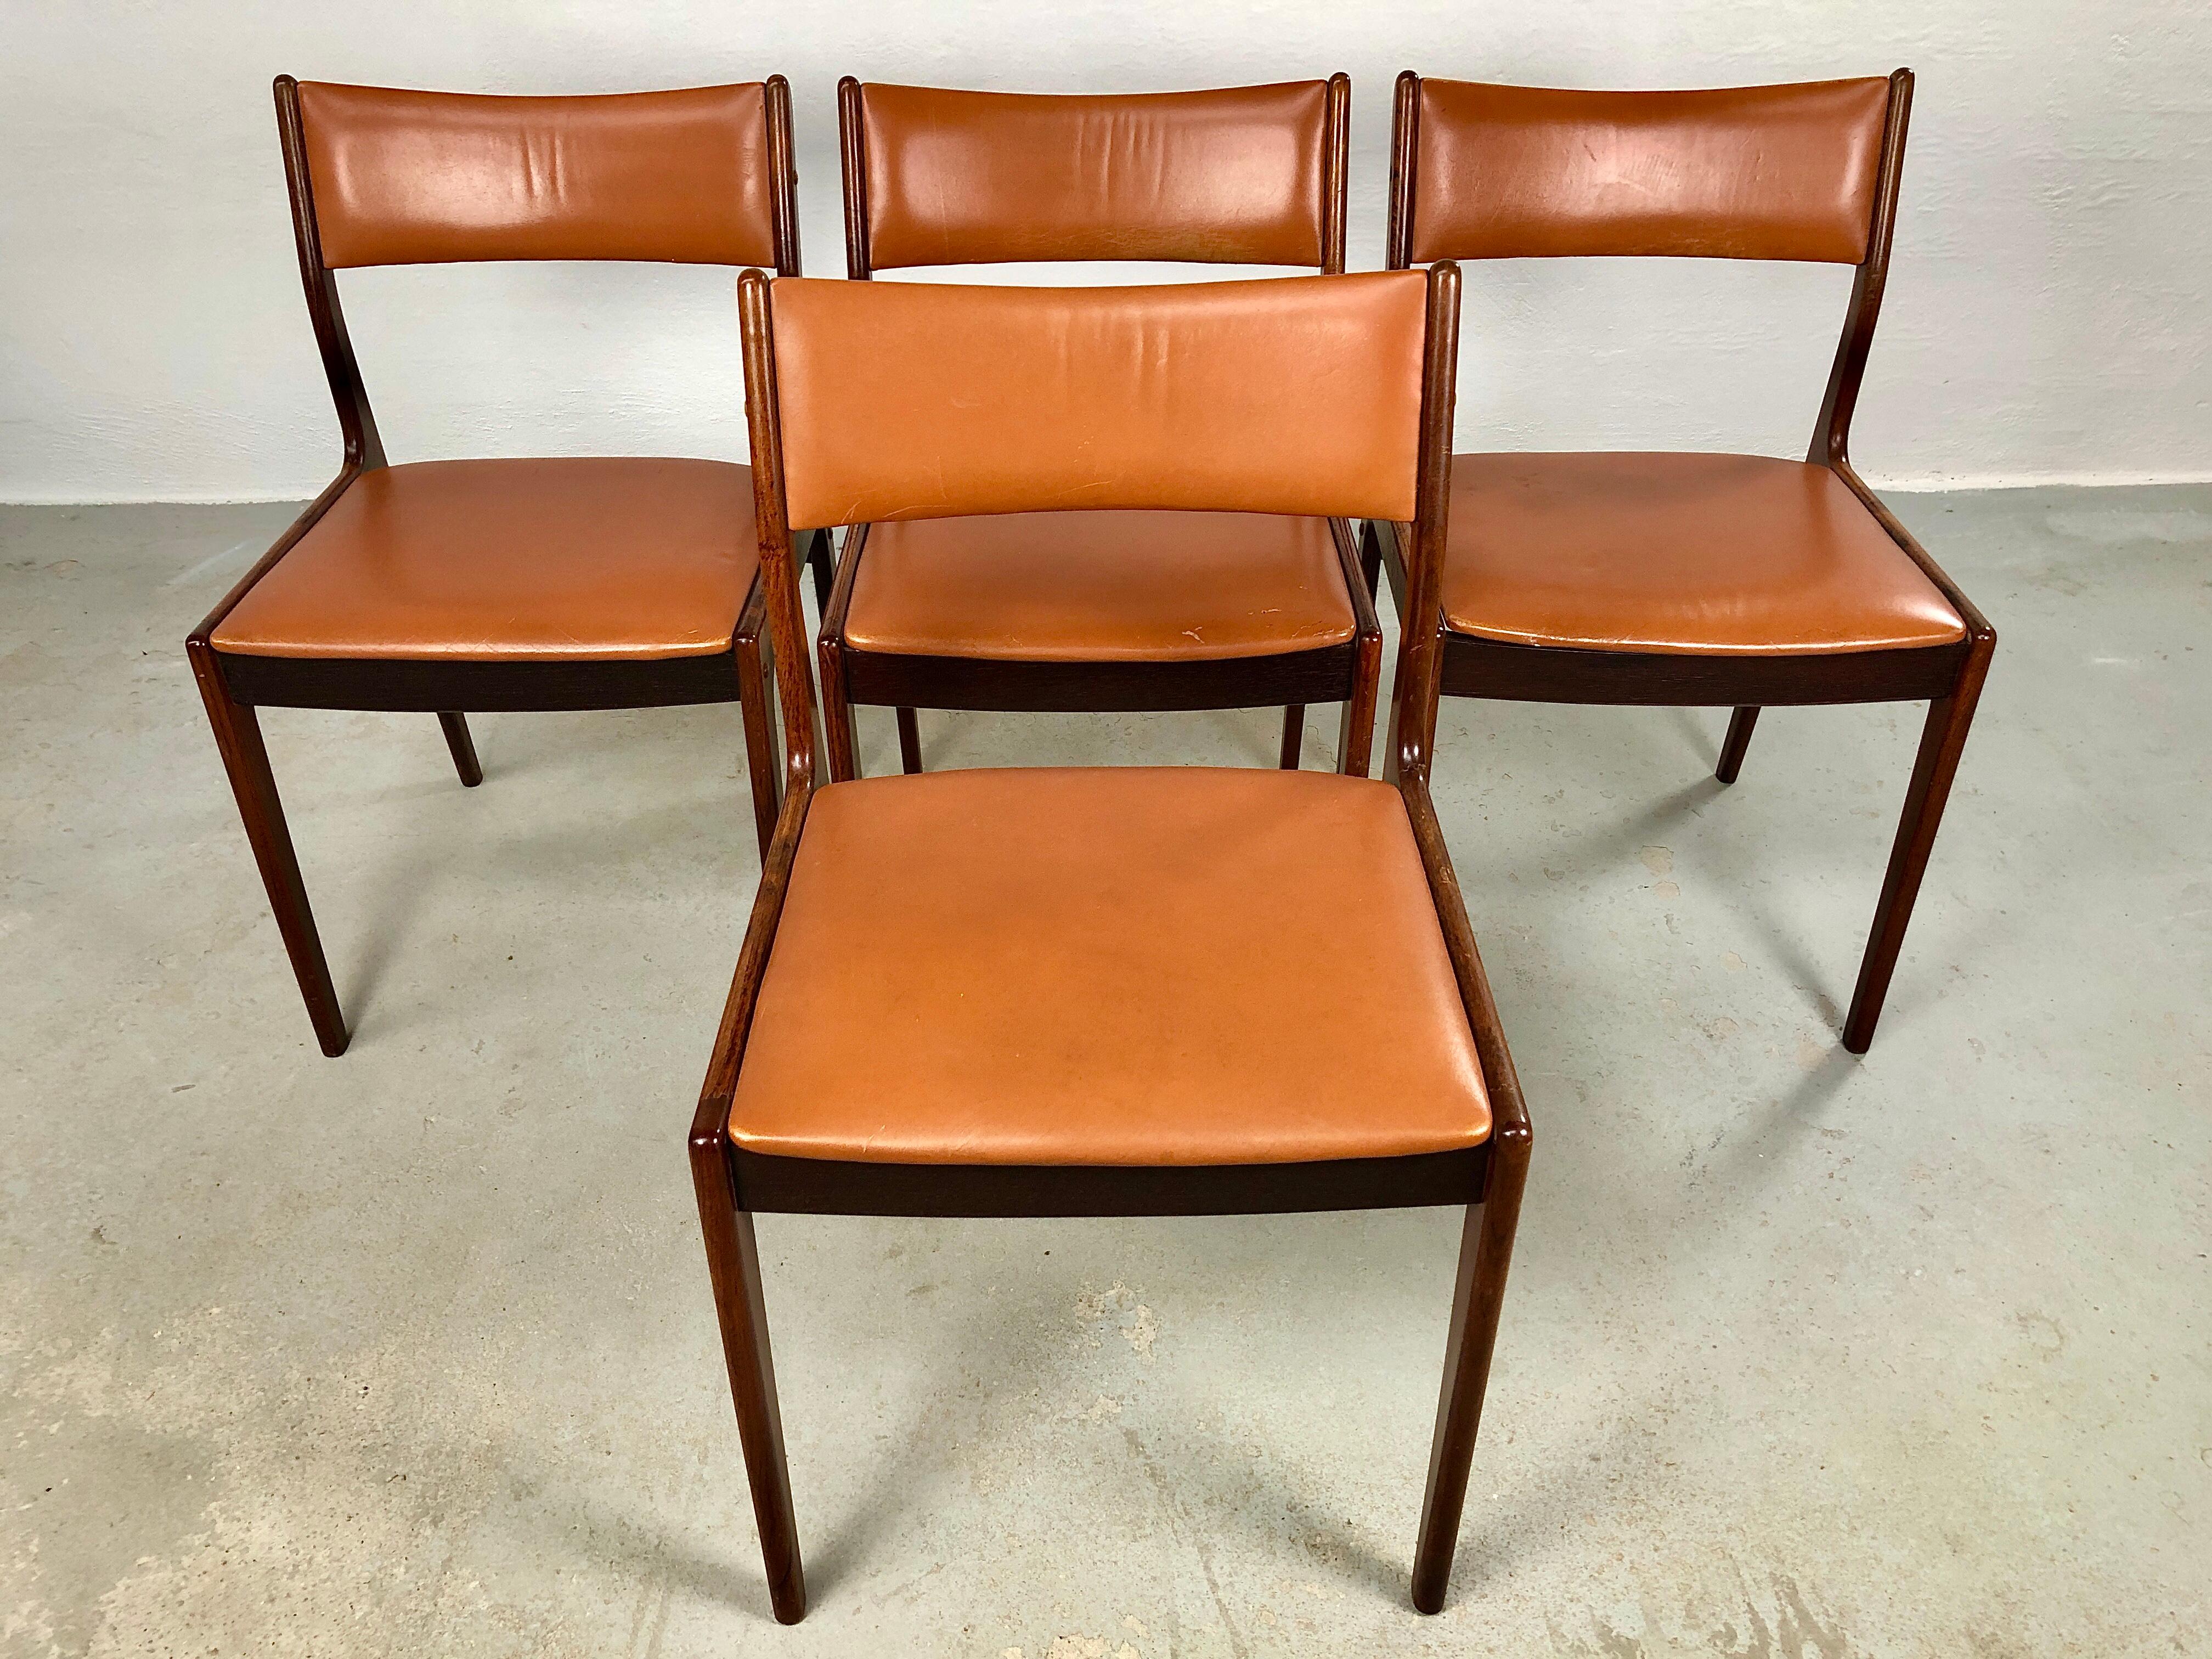 Set of 4 fully restored Danish Johannes Andersen rosewood dining chairs custom upholstey included.

The chairs with their simple yet light and elegant Johannes Andersen design have been fully restored by our skilled in house cabinetmakers - all